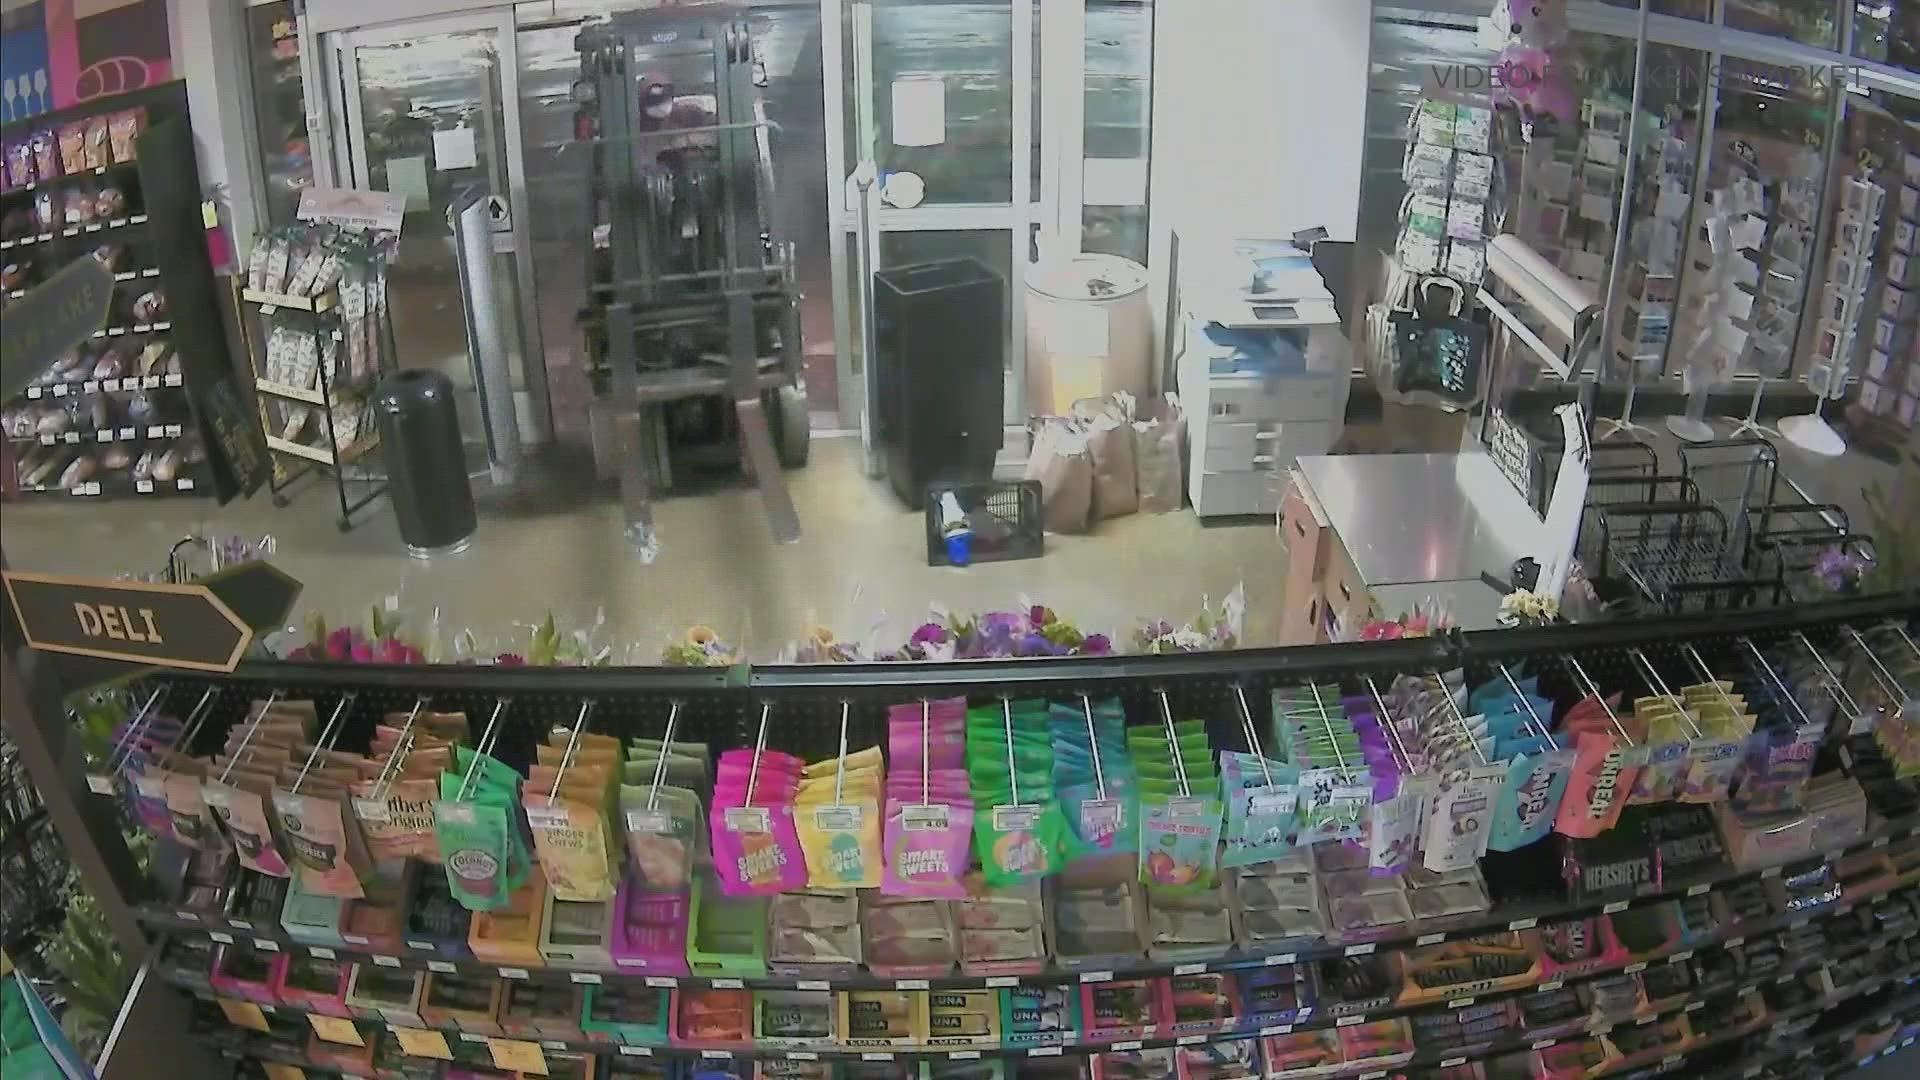 The owner of Ken's Market in Greenwood said the thieves seemed "semi-professional."